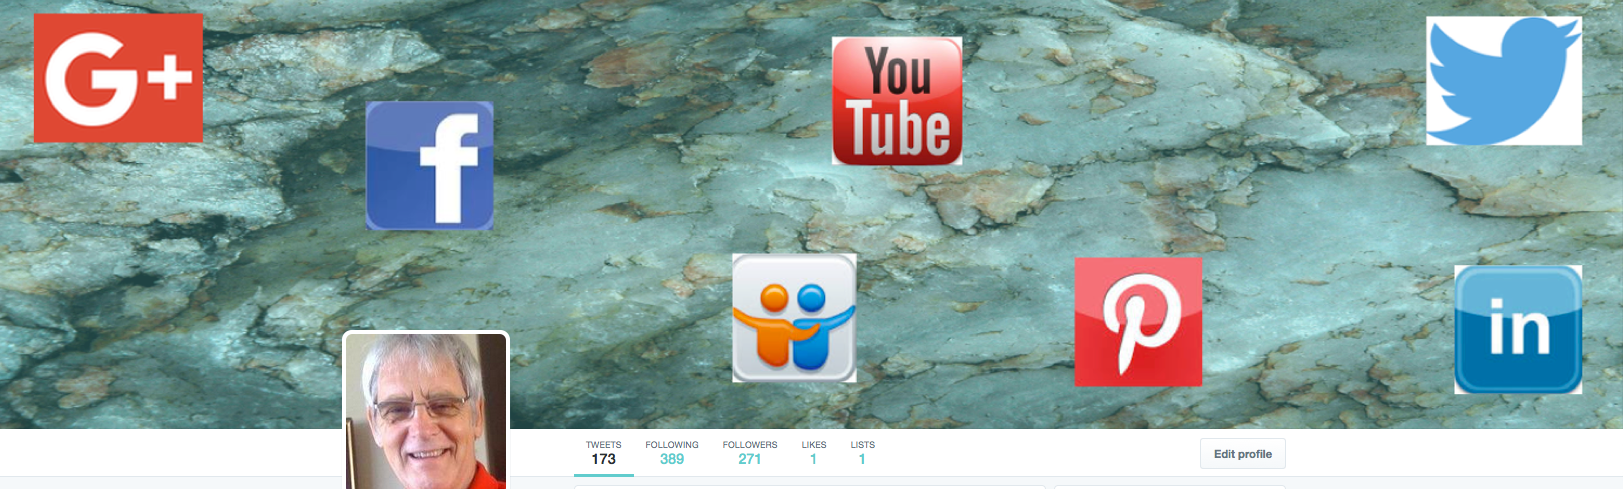 social media sites Twitter header & profile picture